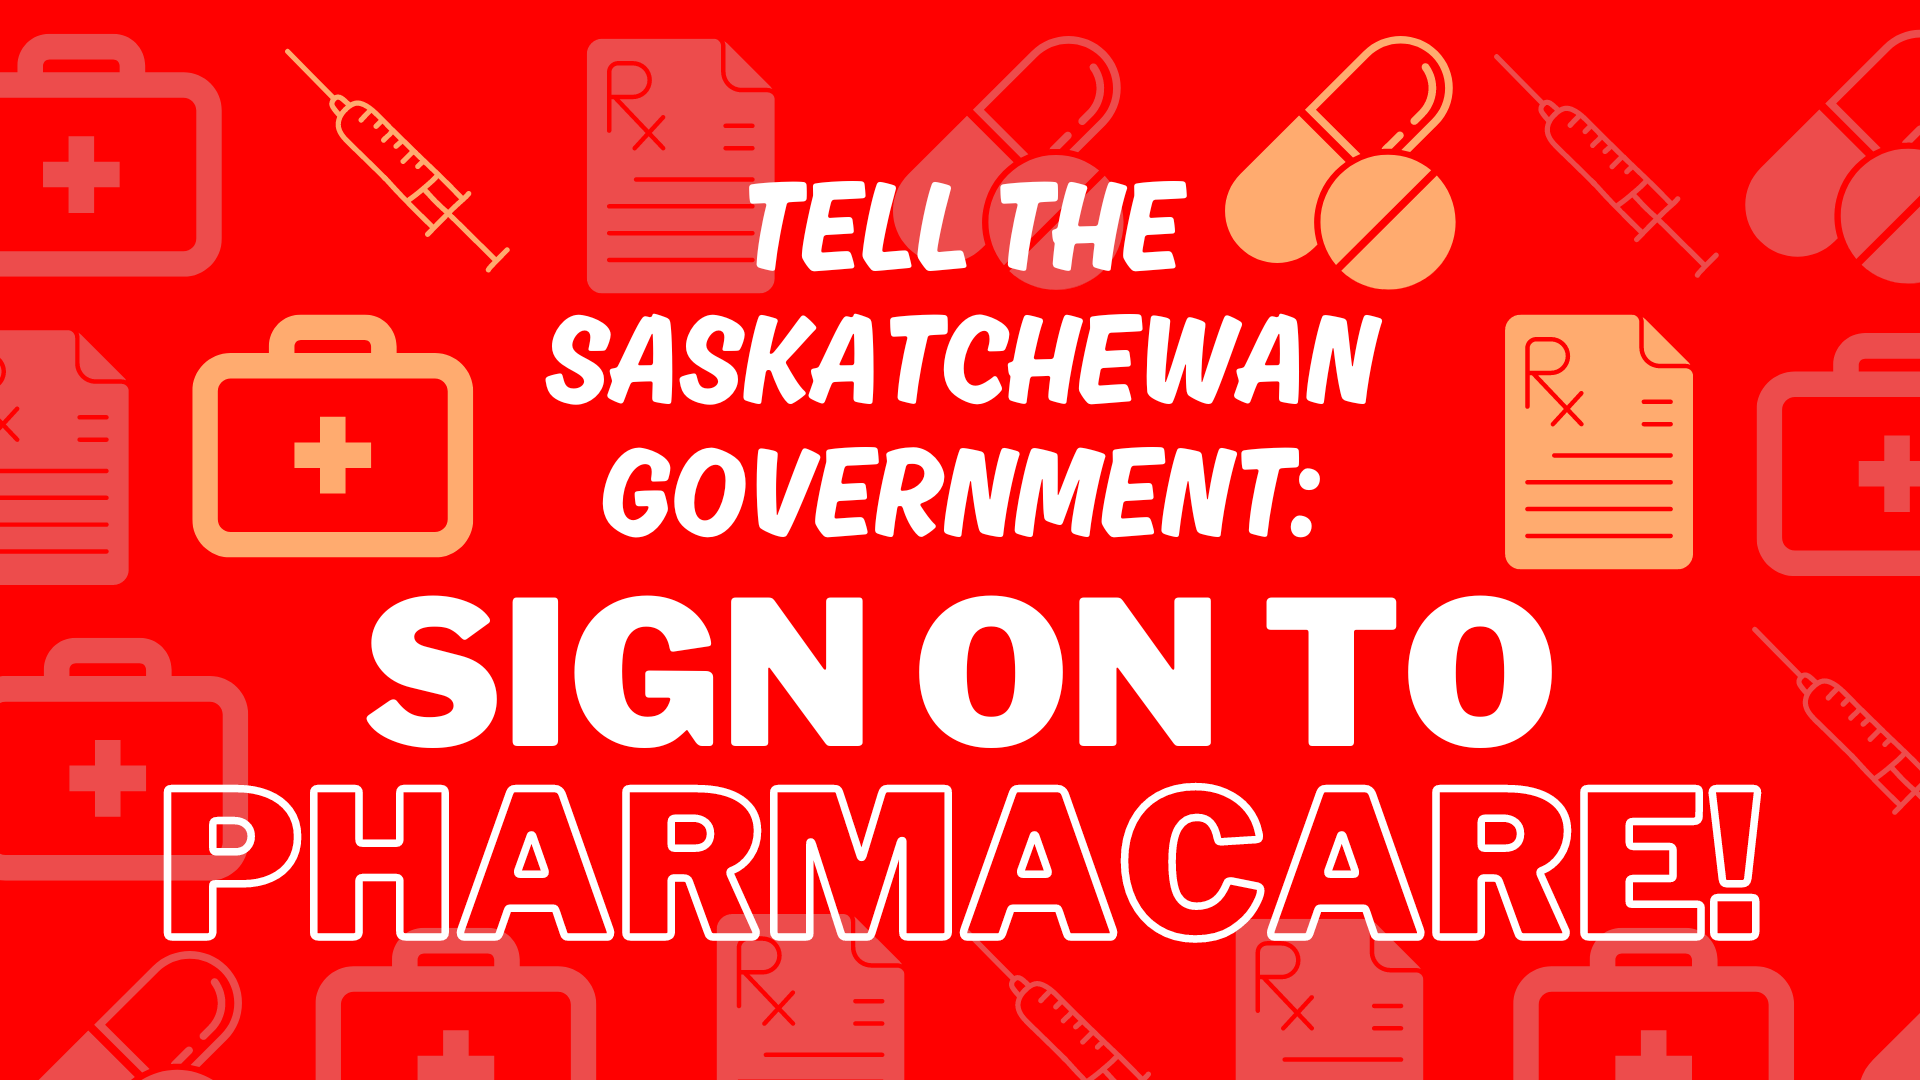 Tell the Saskatchewan goverment to sign on to Pharmacare.